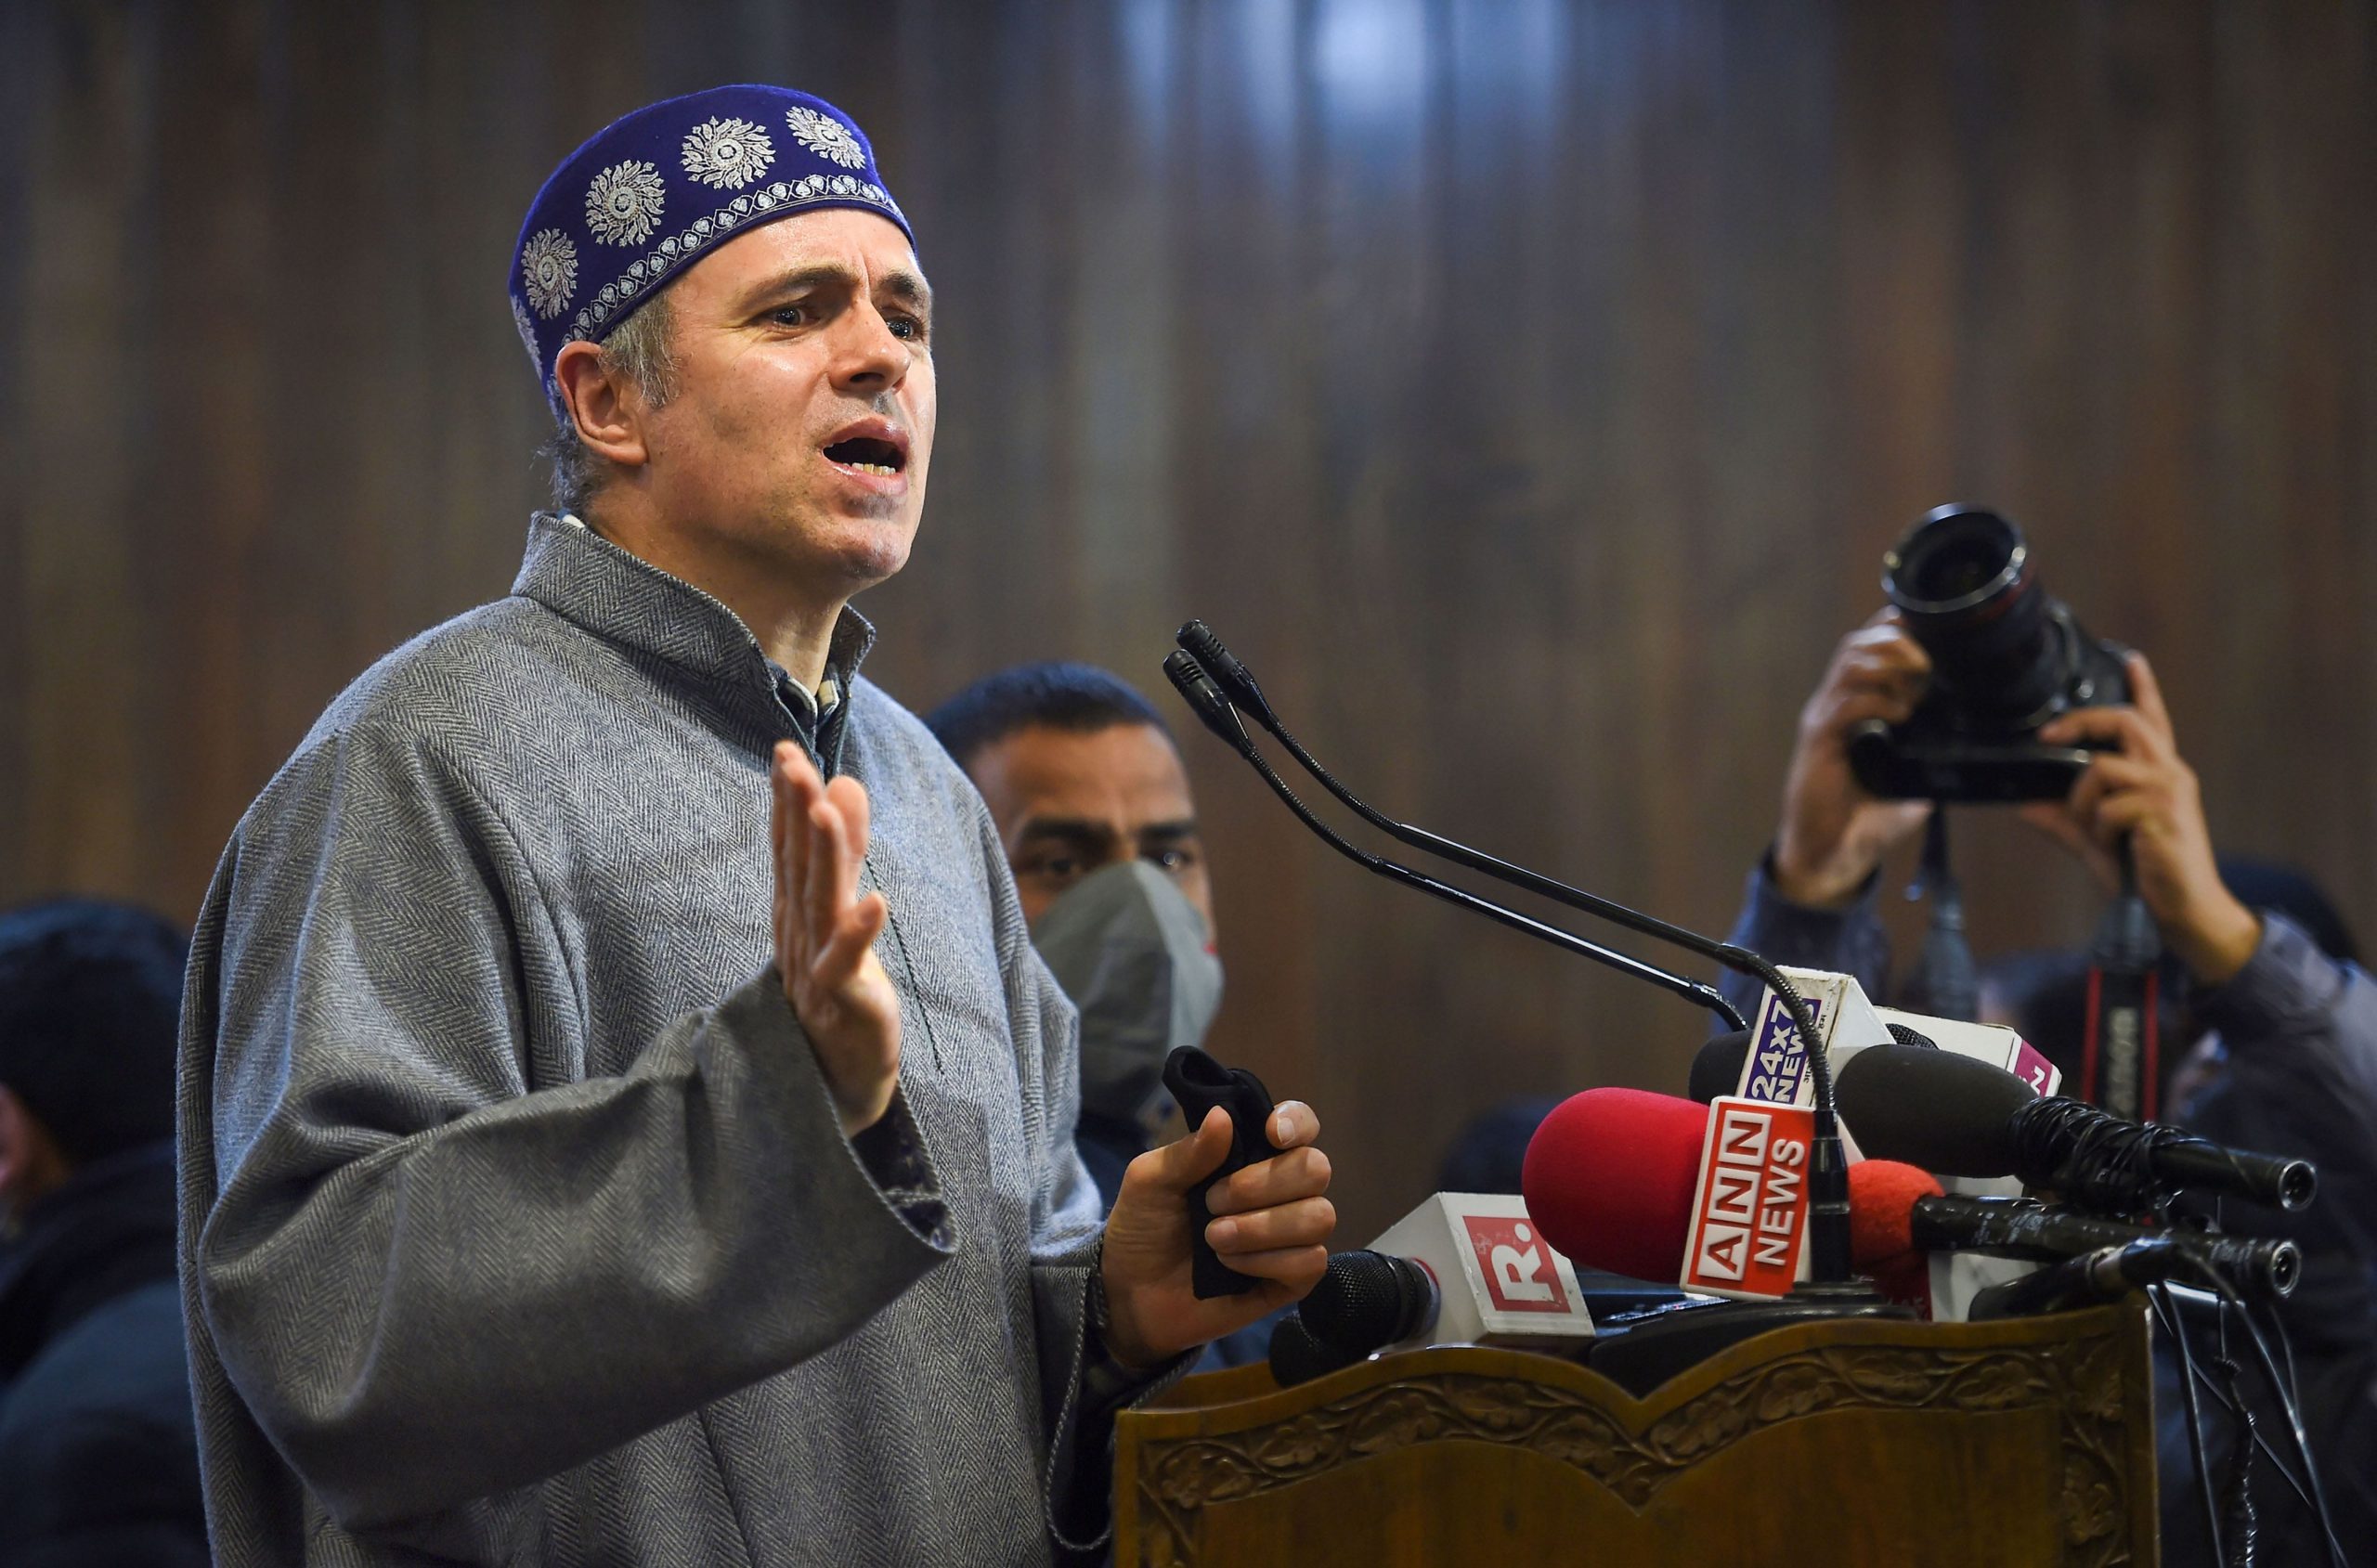 ‘New model of democracy’: Omar Abdullah claims he’s under house arrest